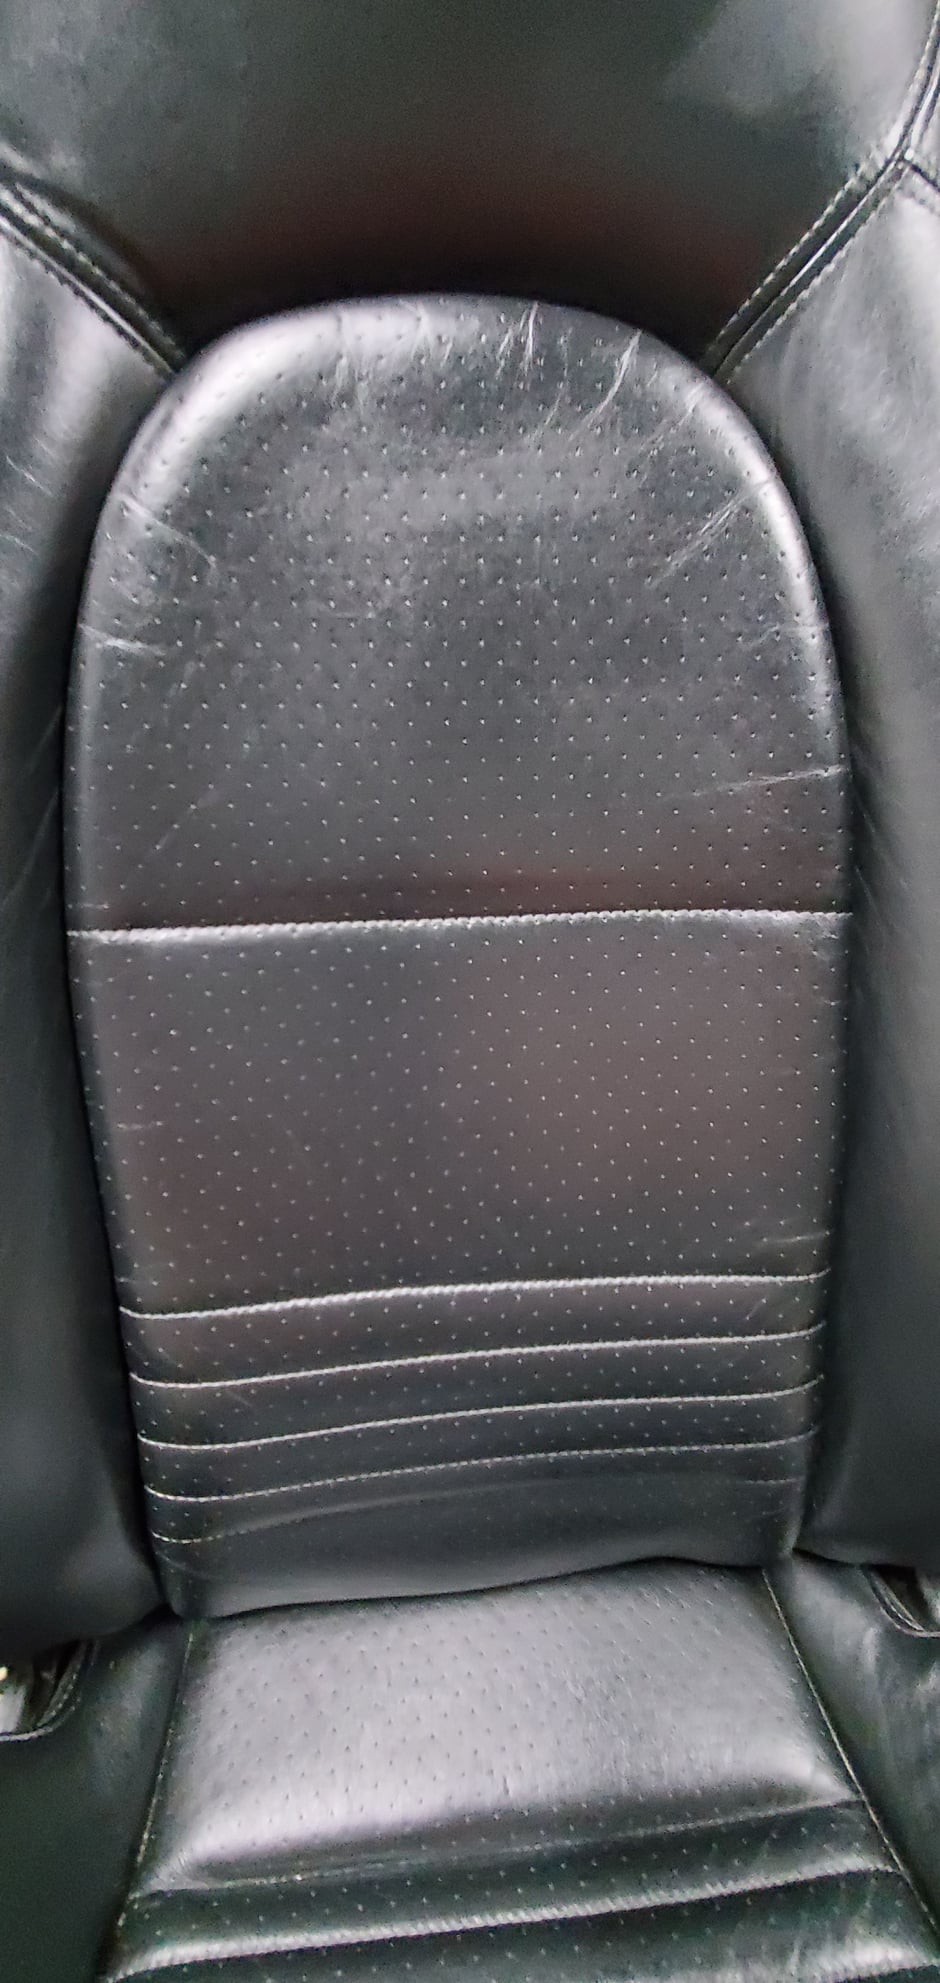 Interior/Upholstery - Porsche 996 Powered Front Seats - Used - 1999 to 2004 Porsche 911 - South San Francisco, CA 94080, United States